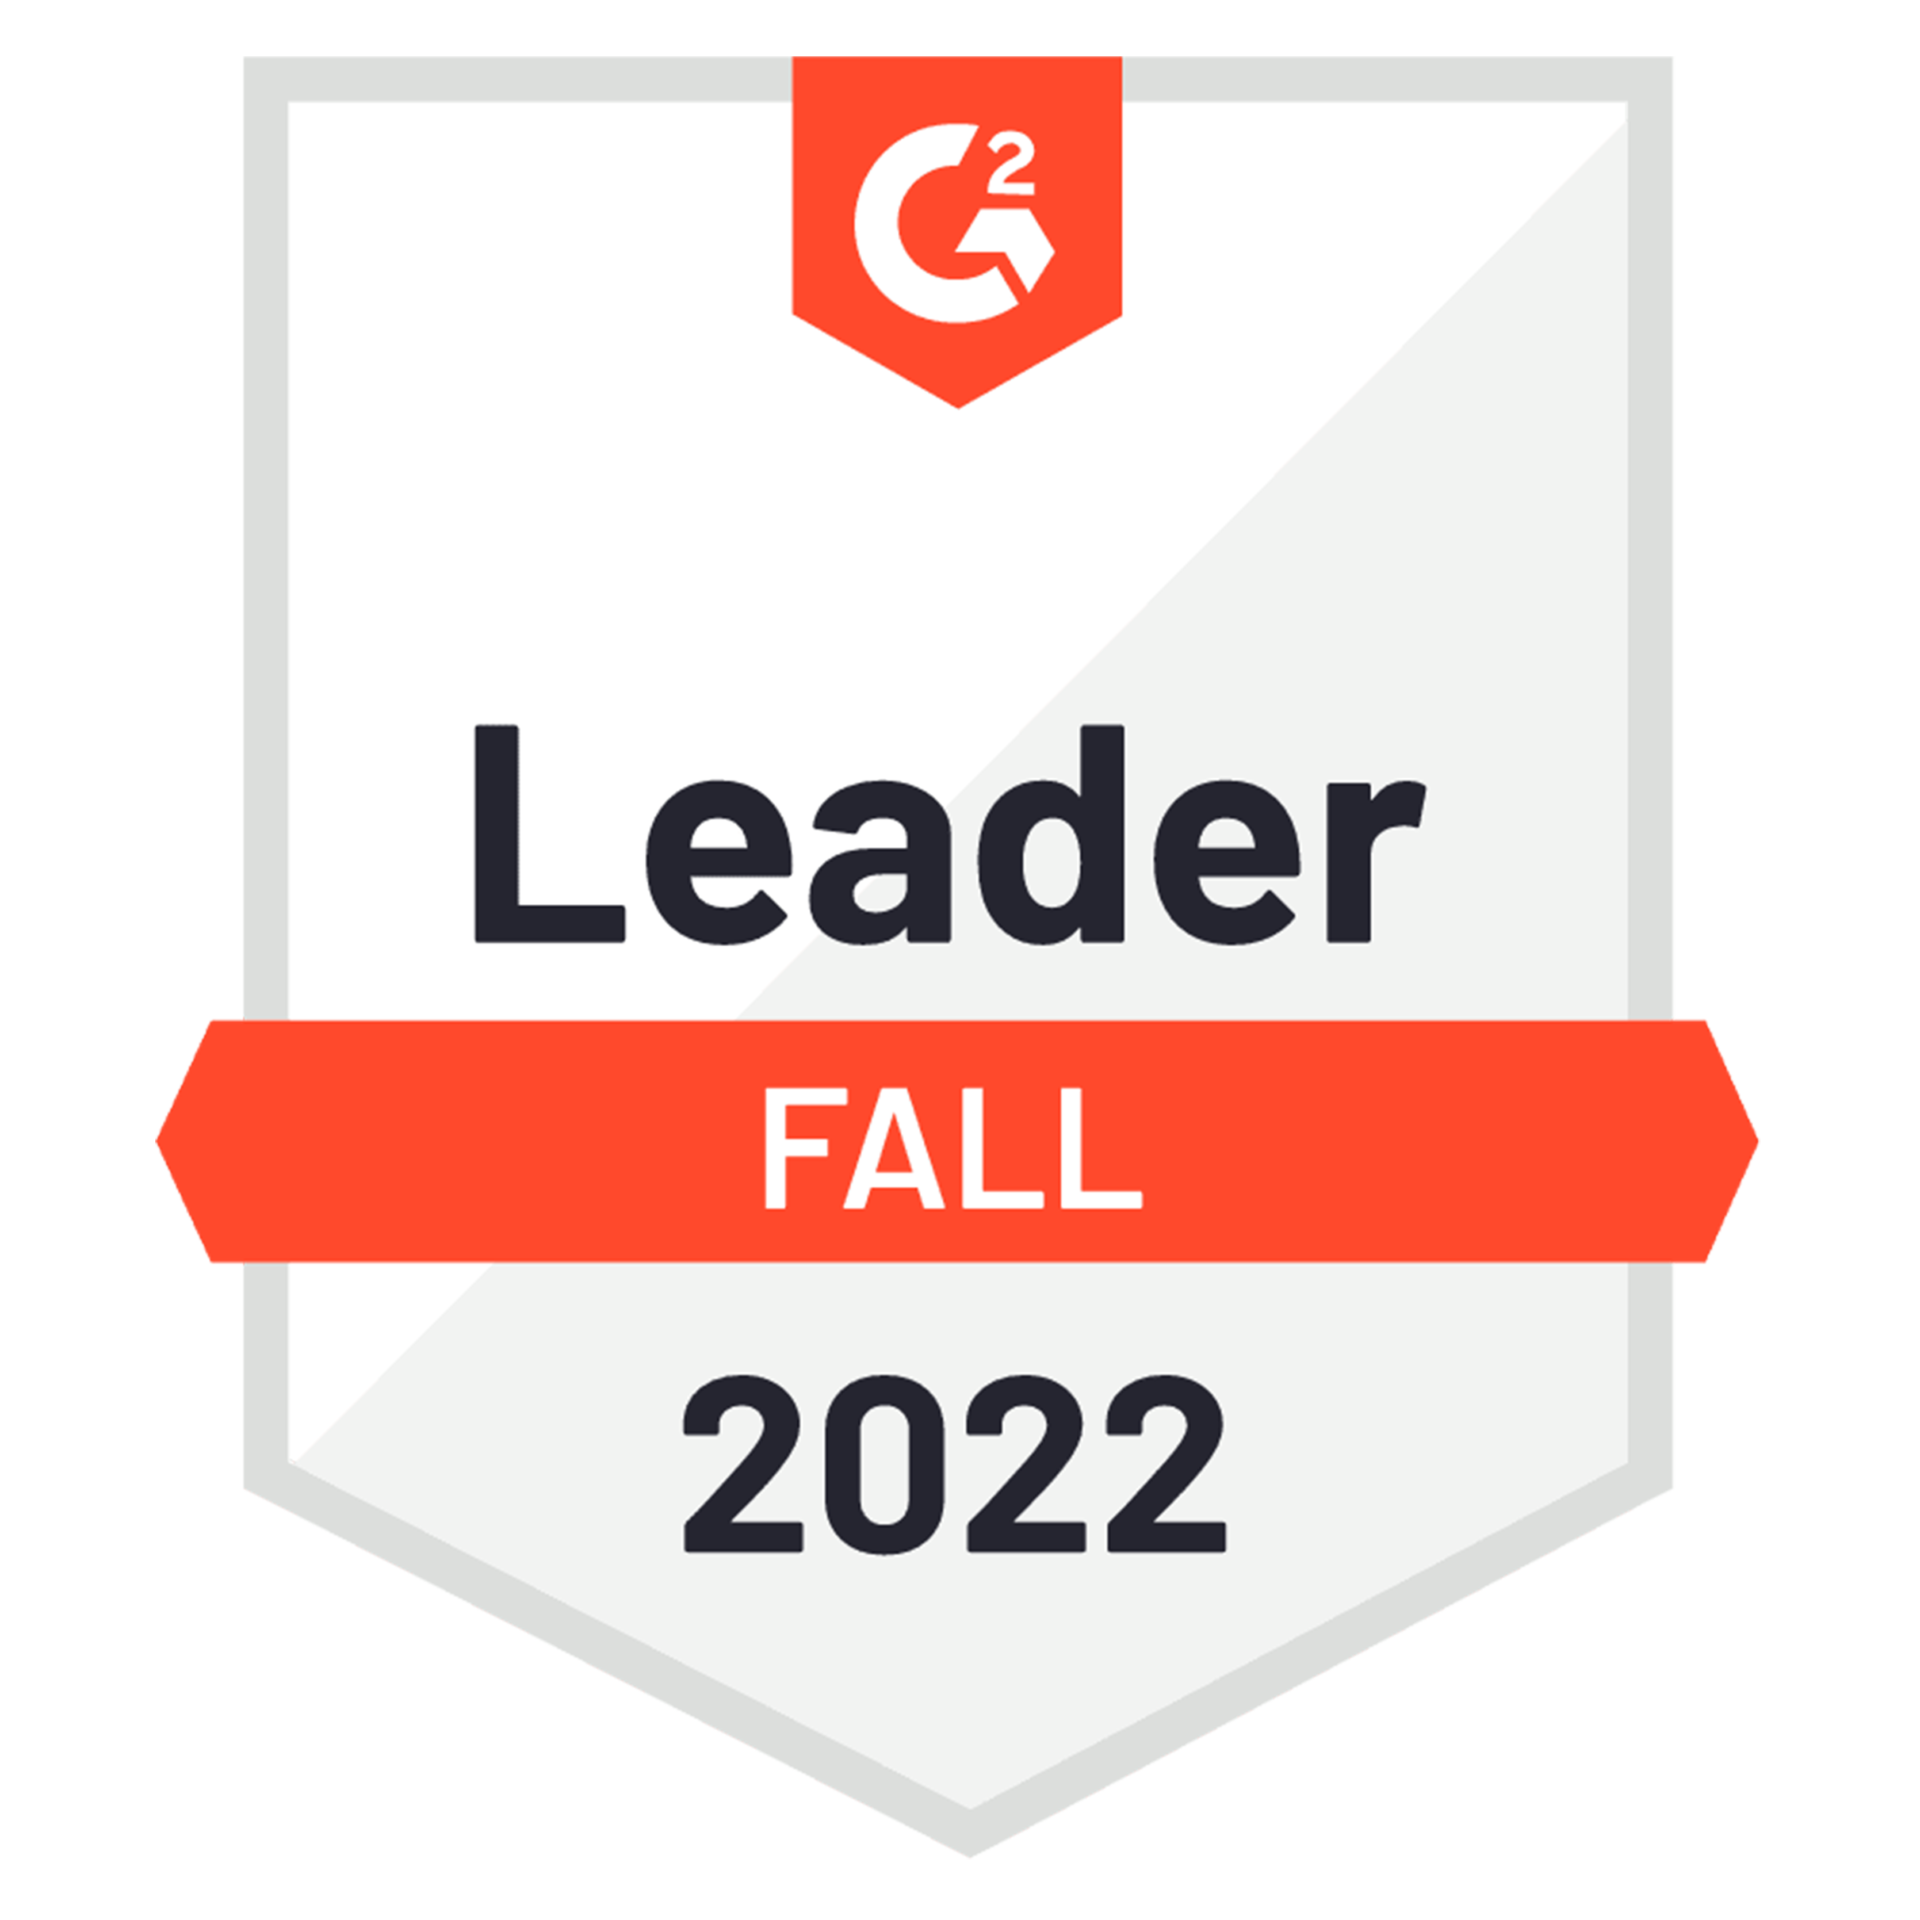 Brainier Named a Leader in 32 Categories in G2.com Fall 2022 Reports